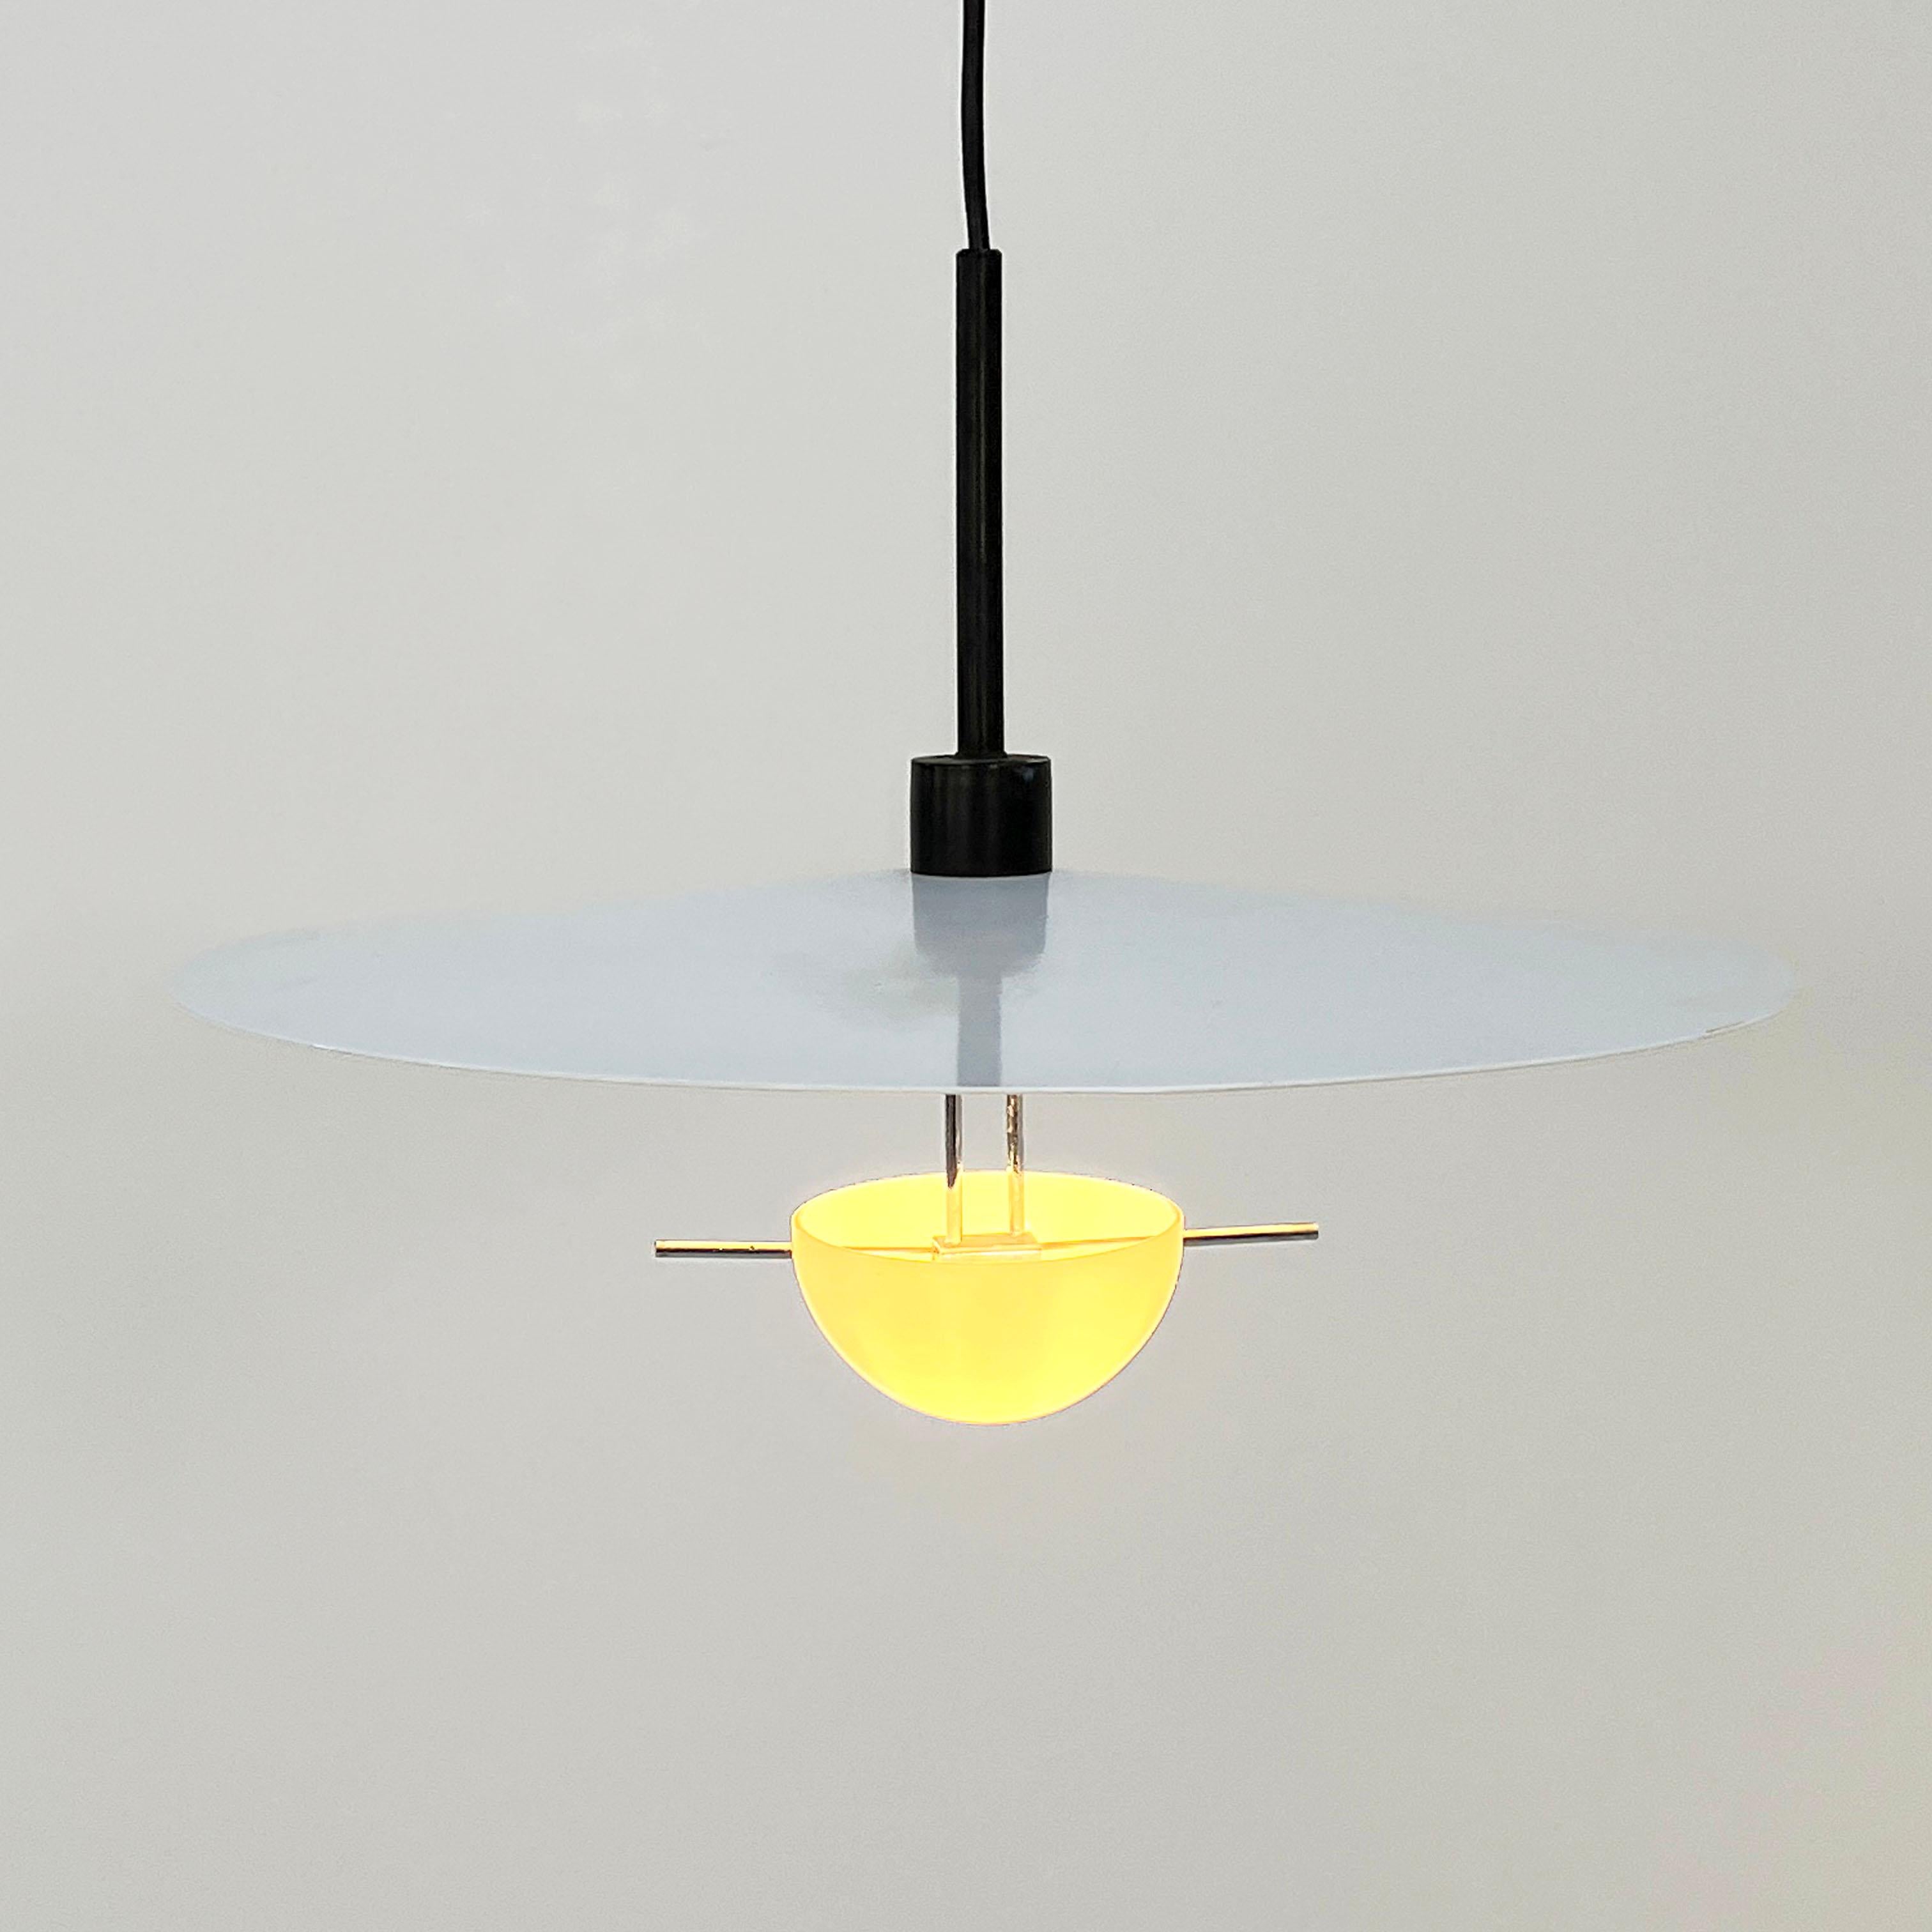 Metal Nara 462 Hanging Lamp by Vico Magistretti for Oluce, 1980s